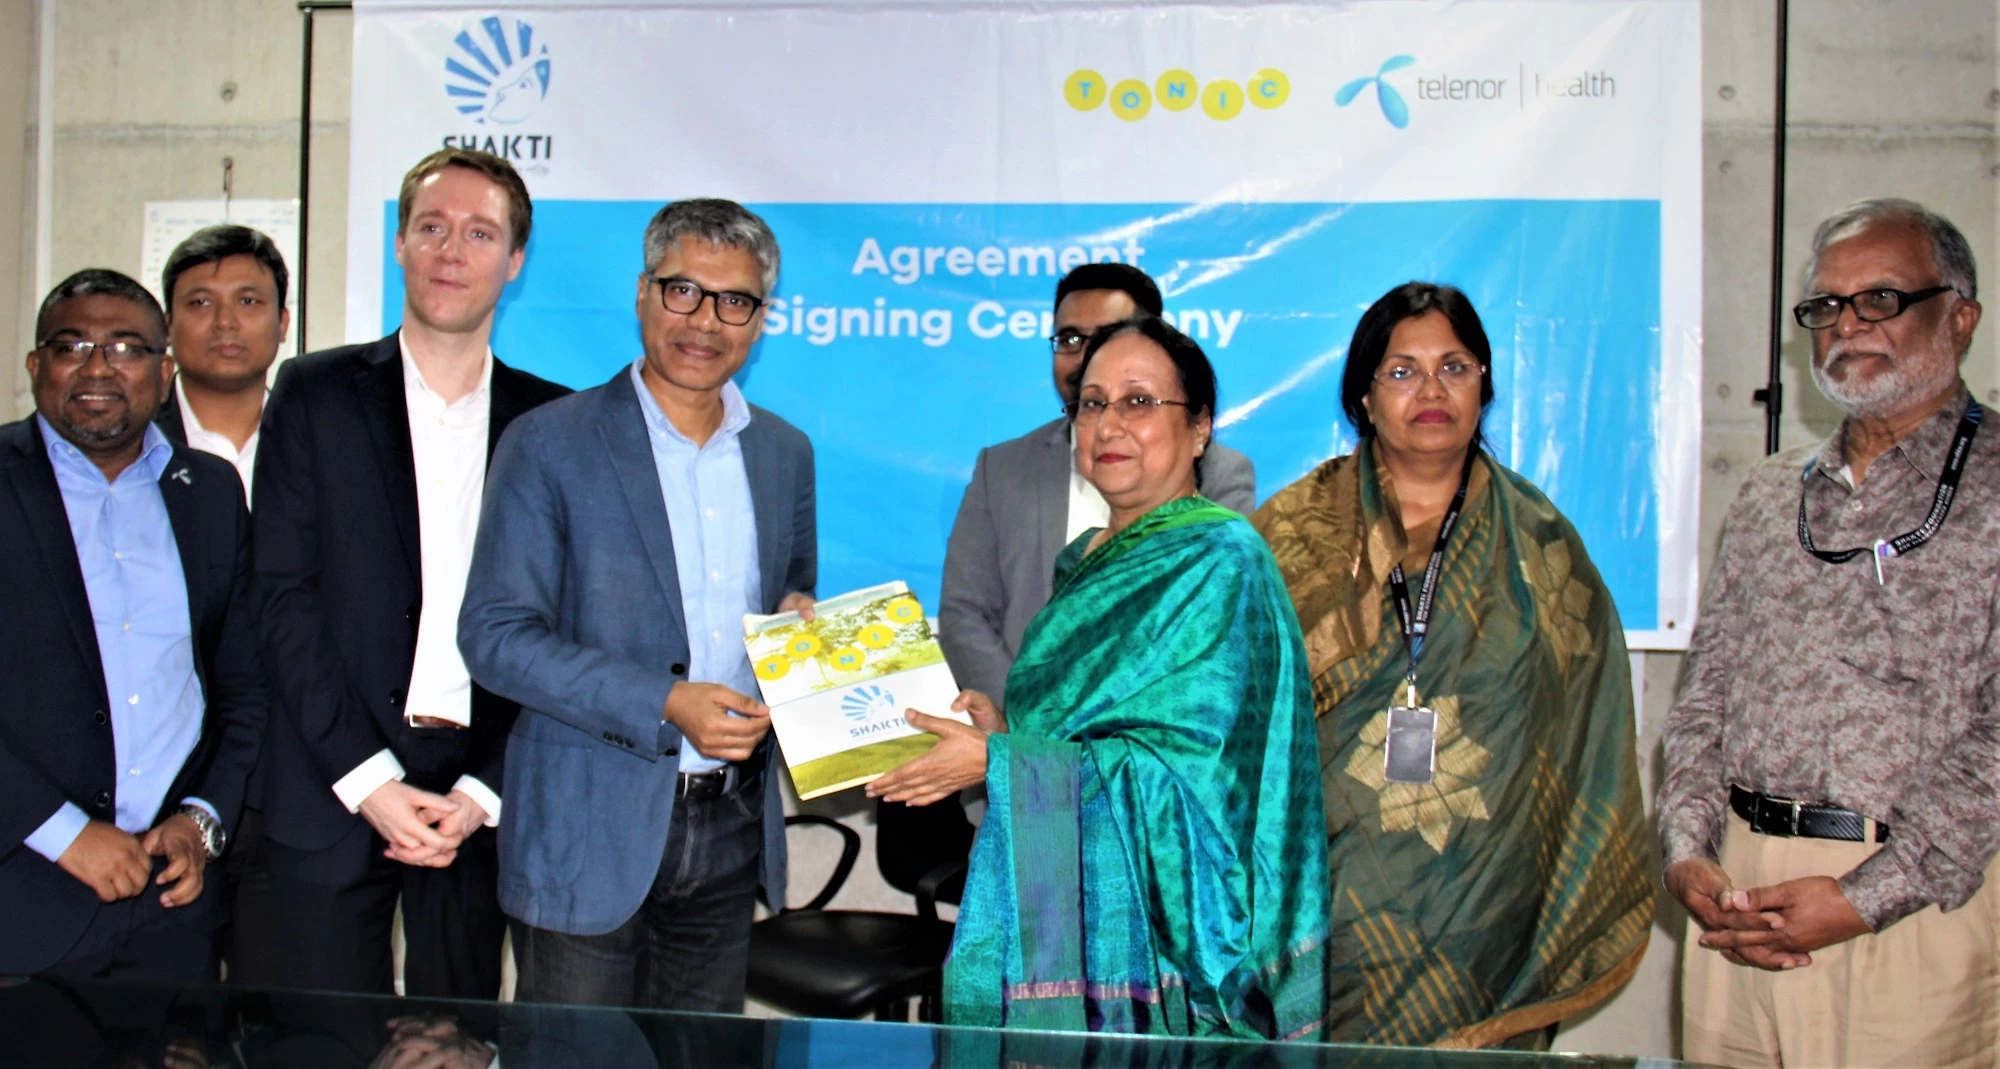 Telenor Health A/S signed an agreement with Shakti Foundation for Disadvantaged Women